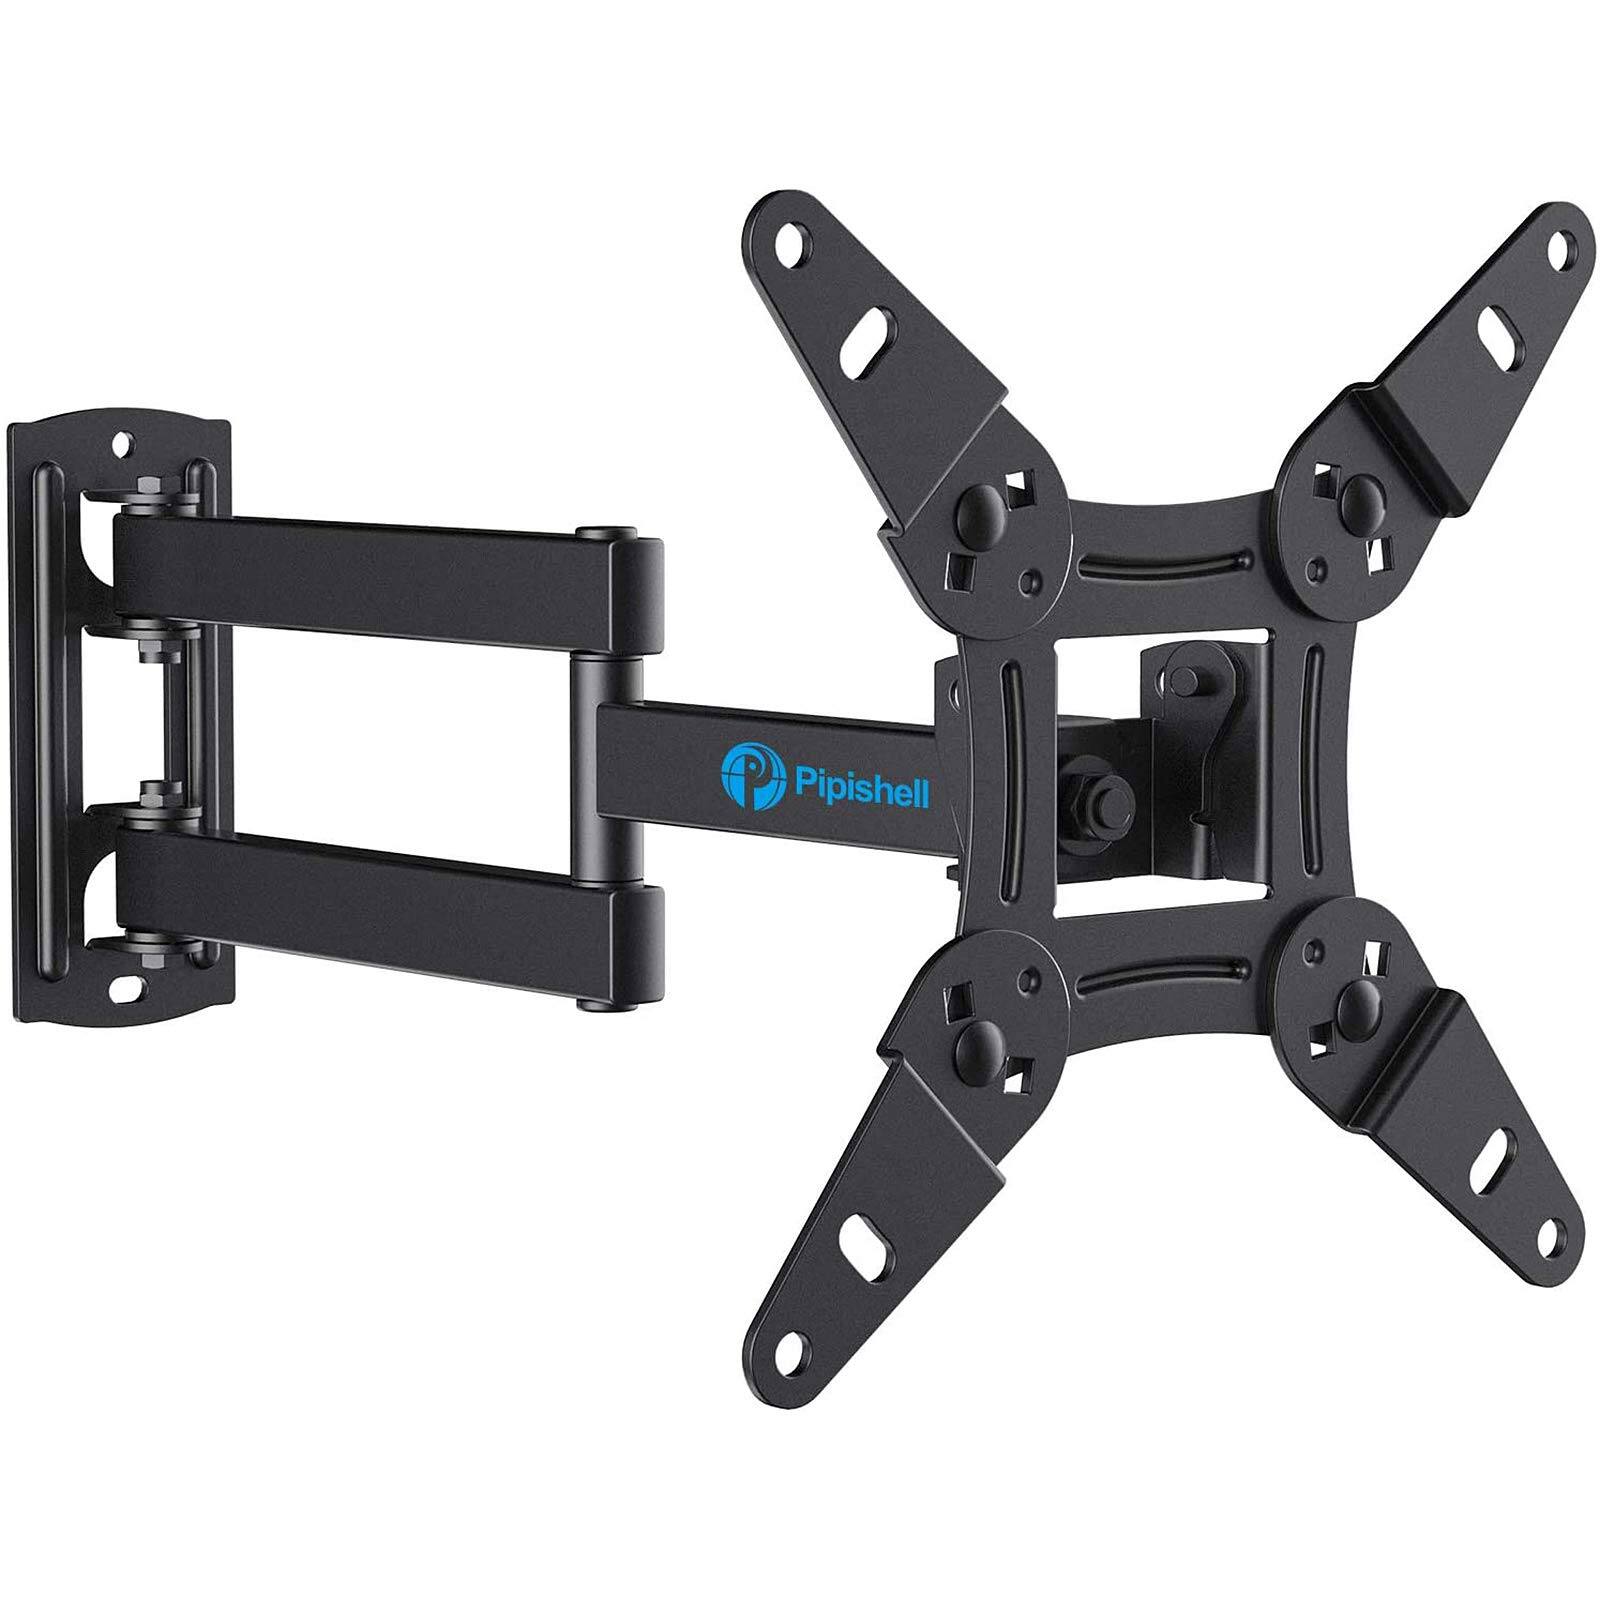 Pipishell Full Motion TV Monitor Wall Mount for 13-42 Inch $14.19 + Free Shipping w/ Amazon Prime or Orders $25+